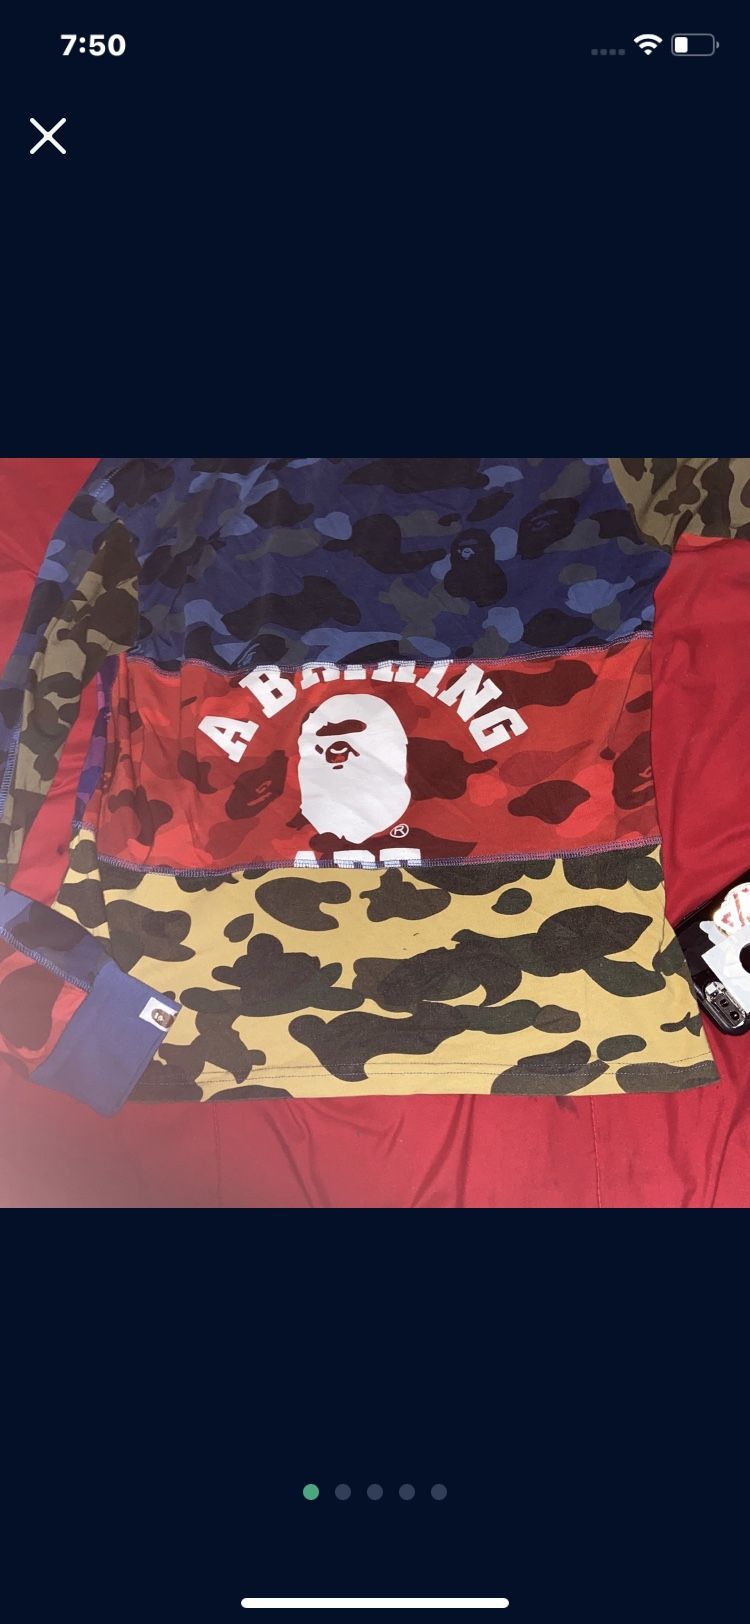 Bape Longsleeve Good Condition Got Bape Bag To Go With It Will Take Good Trades